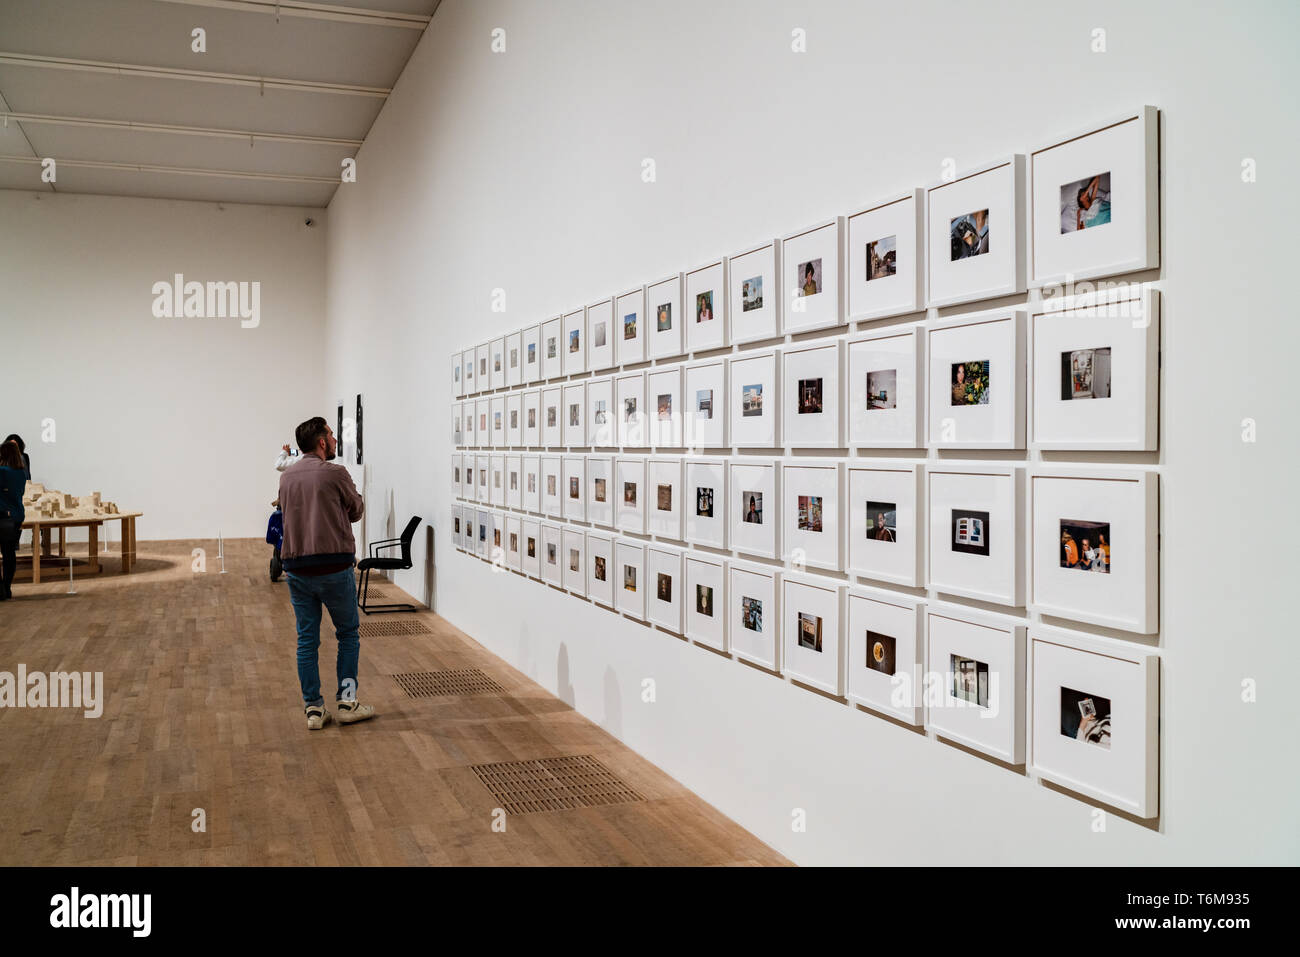 LONDON, UK - APRIL 1, 2019: Tate Modern in London. Gallery, Exposition. Stock Photo